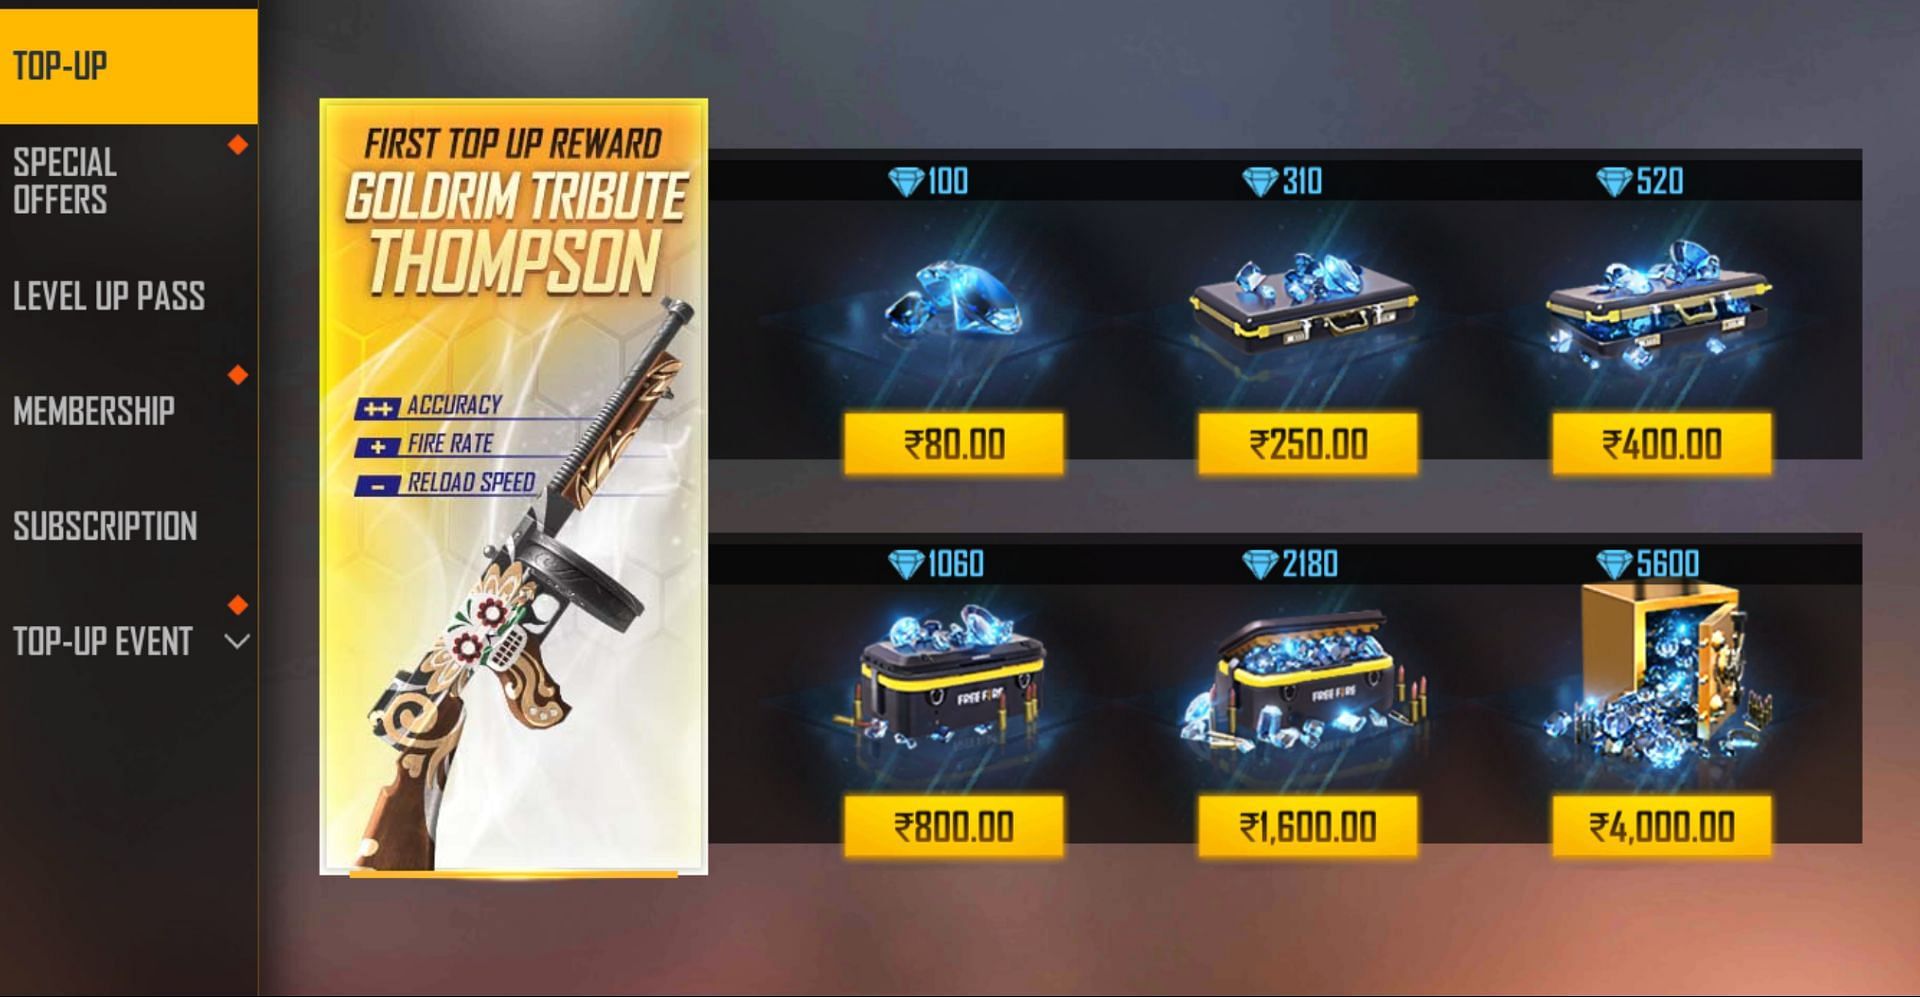 The various top-up options available (Image via Garena)